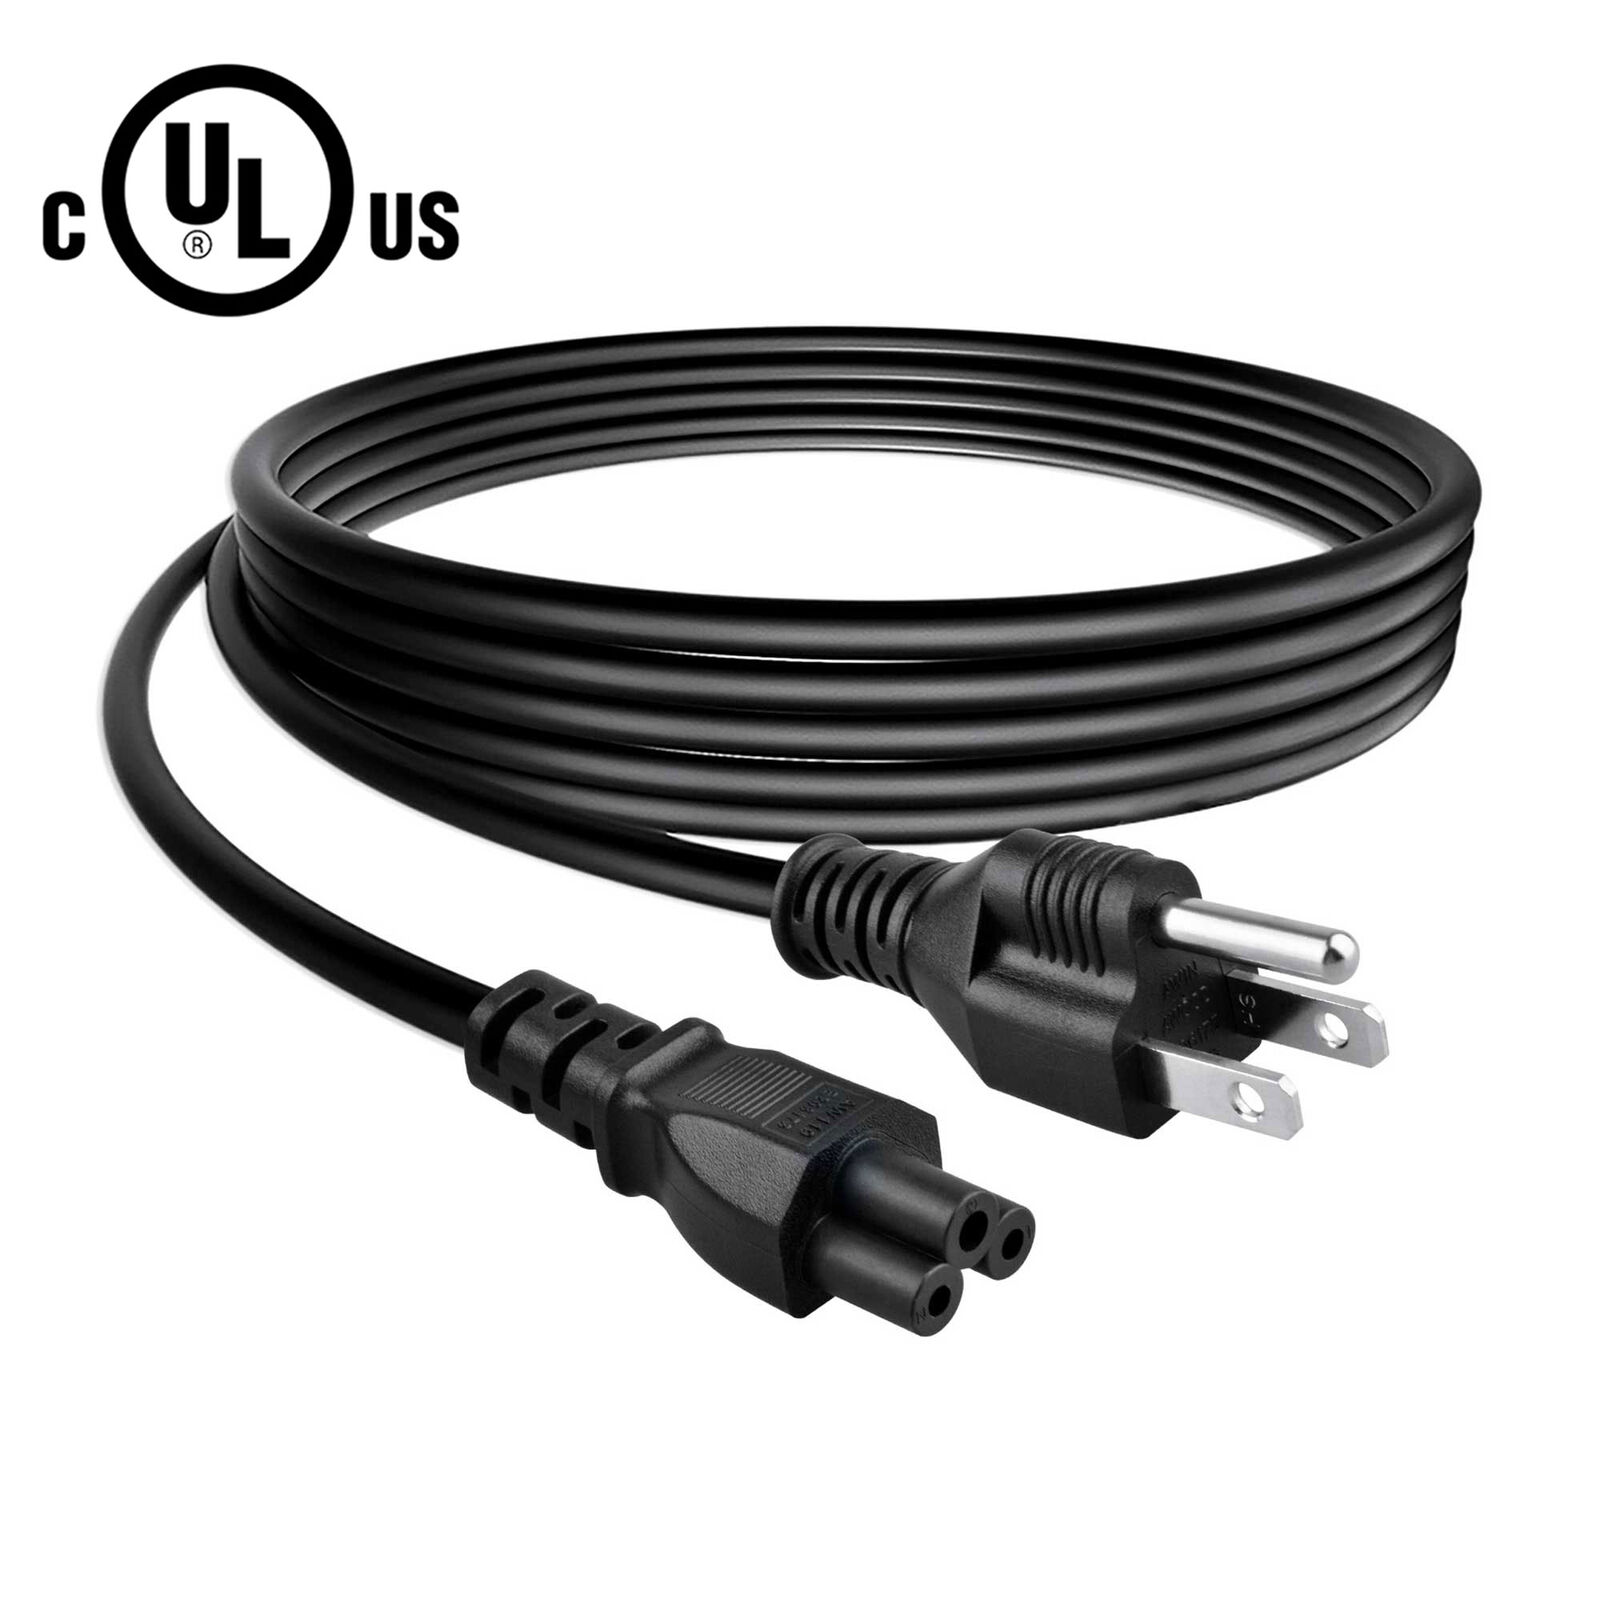 5ft UL AC Power Cord Cable For DELL HP Laptop Adapter Supply Charger US 3-Prong